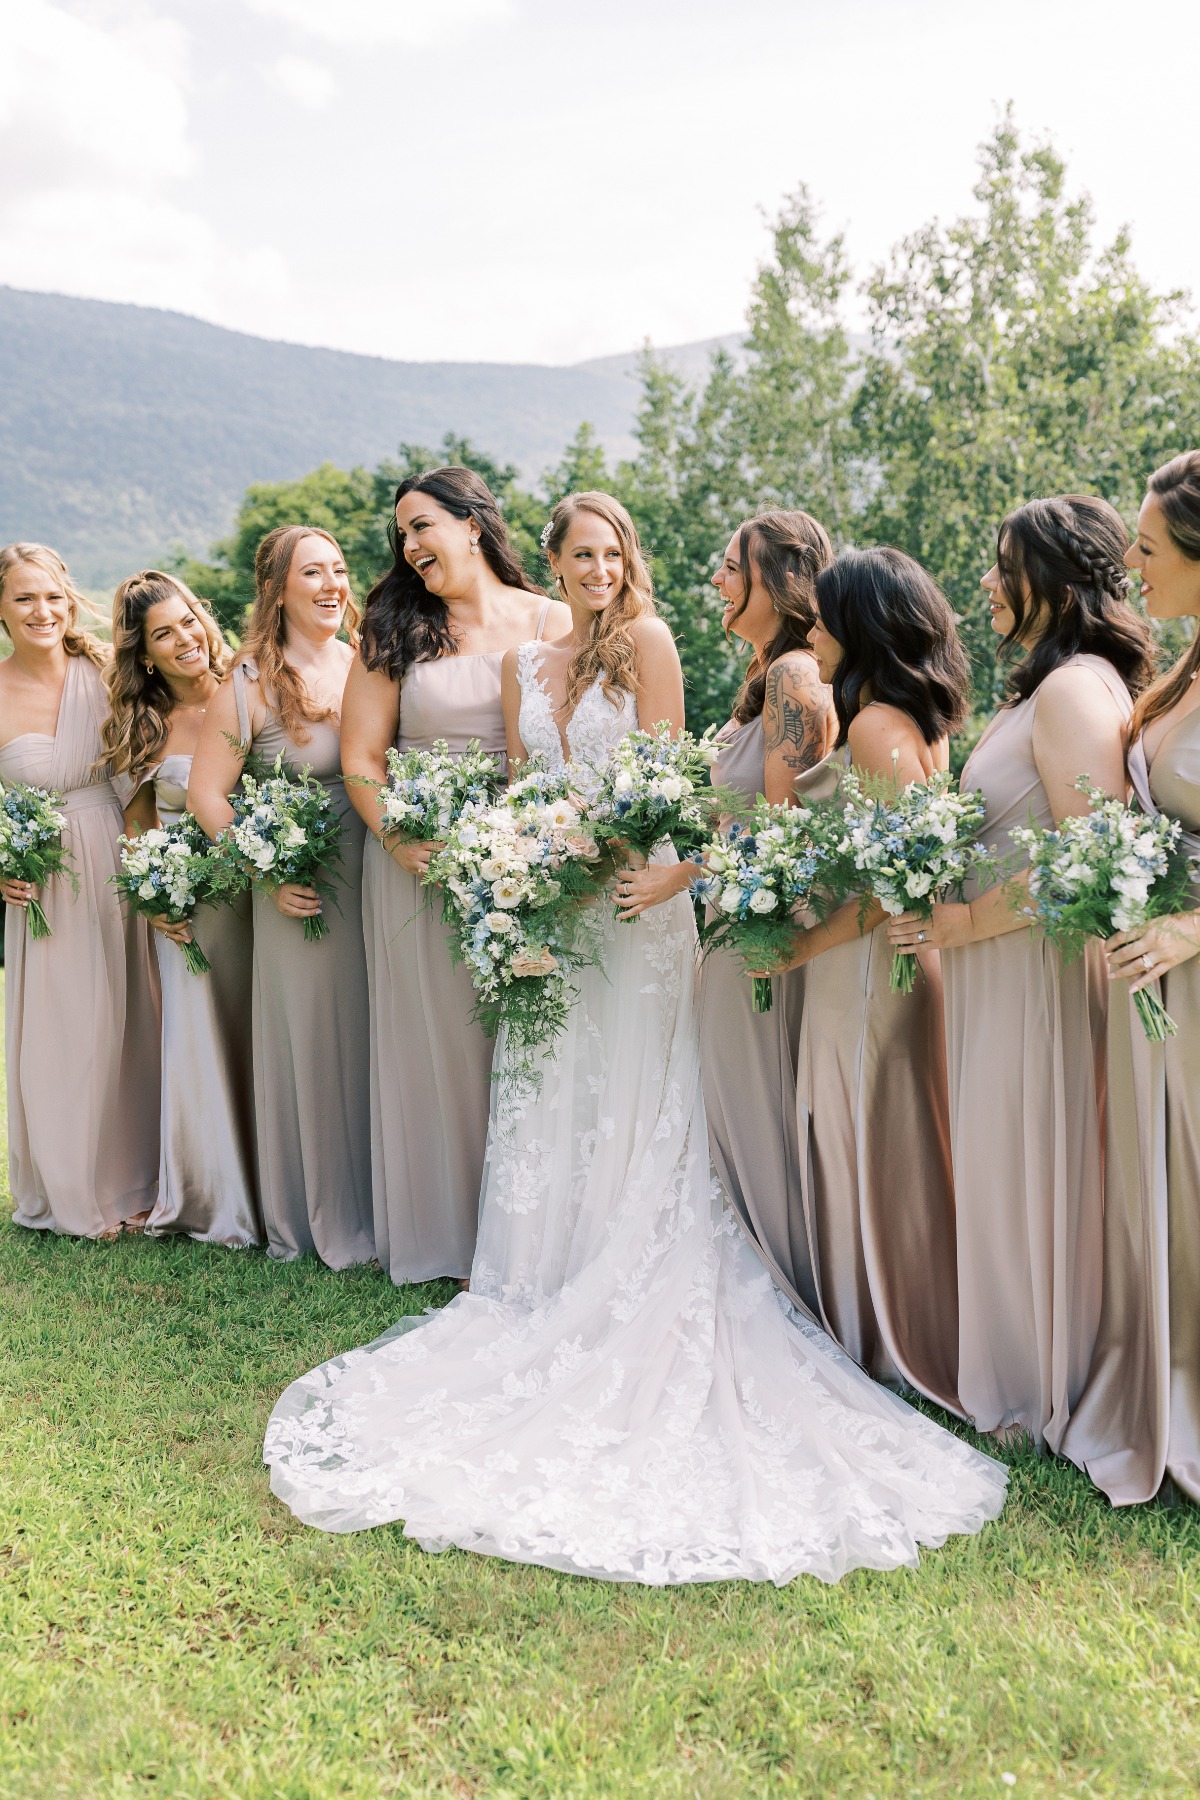 Elegant bride and bridesmaids carrying blue floral bouquets